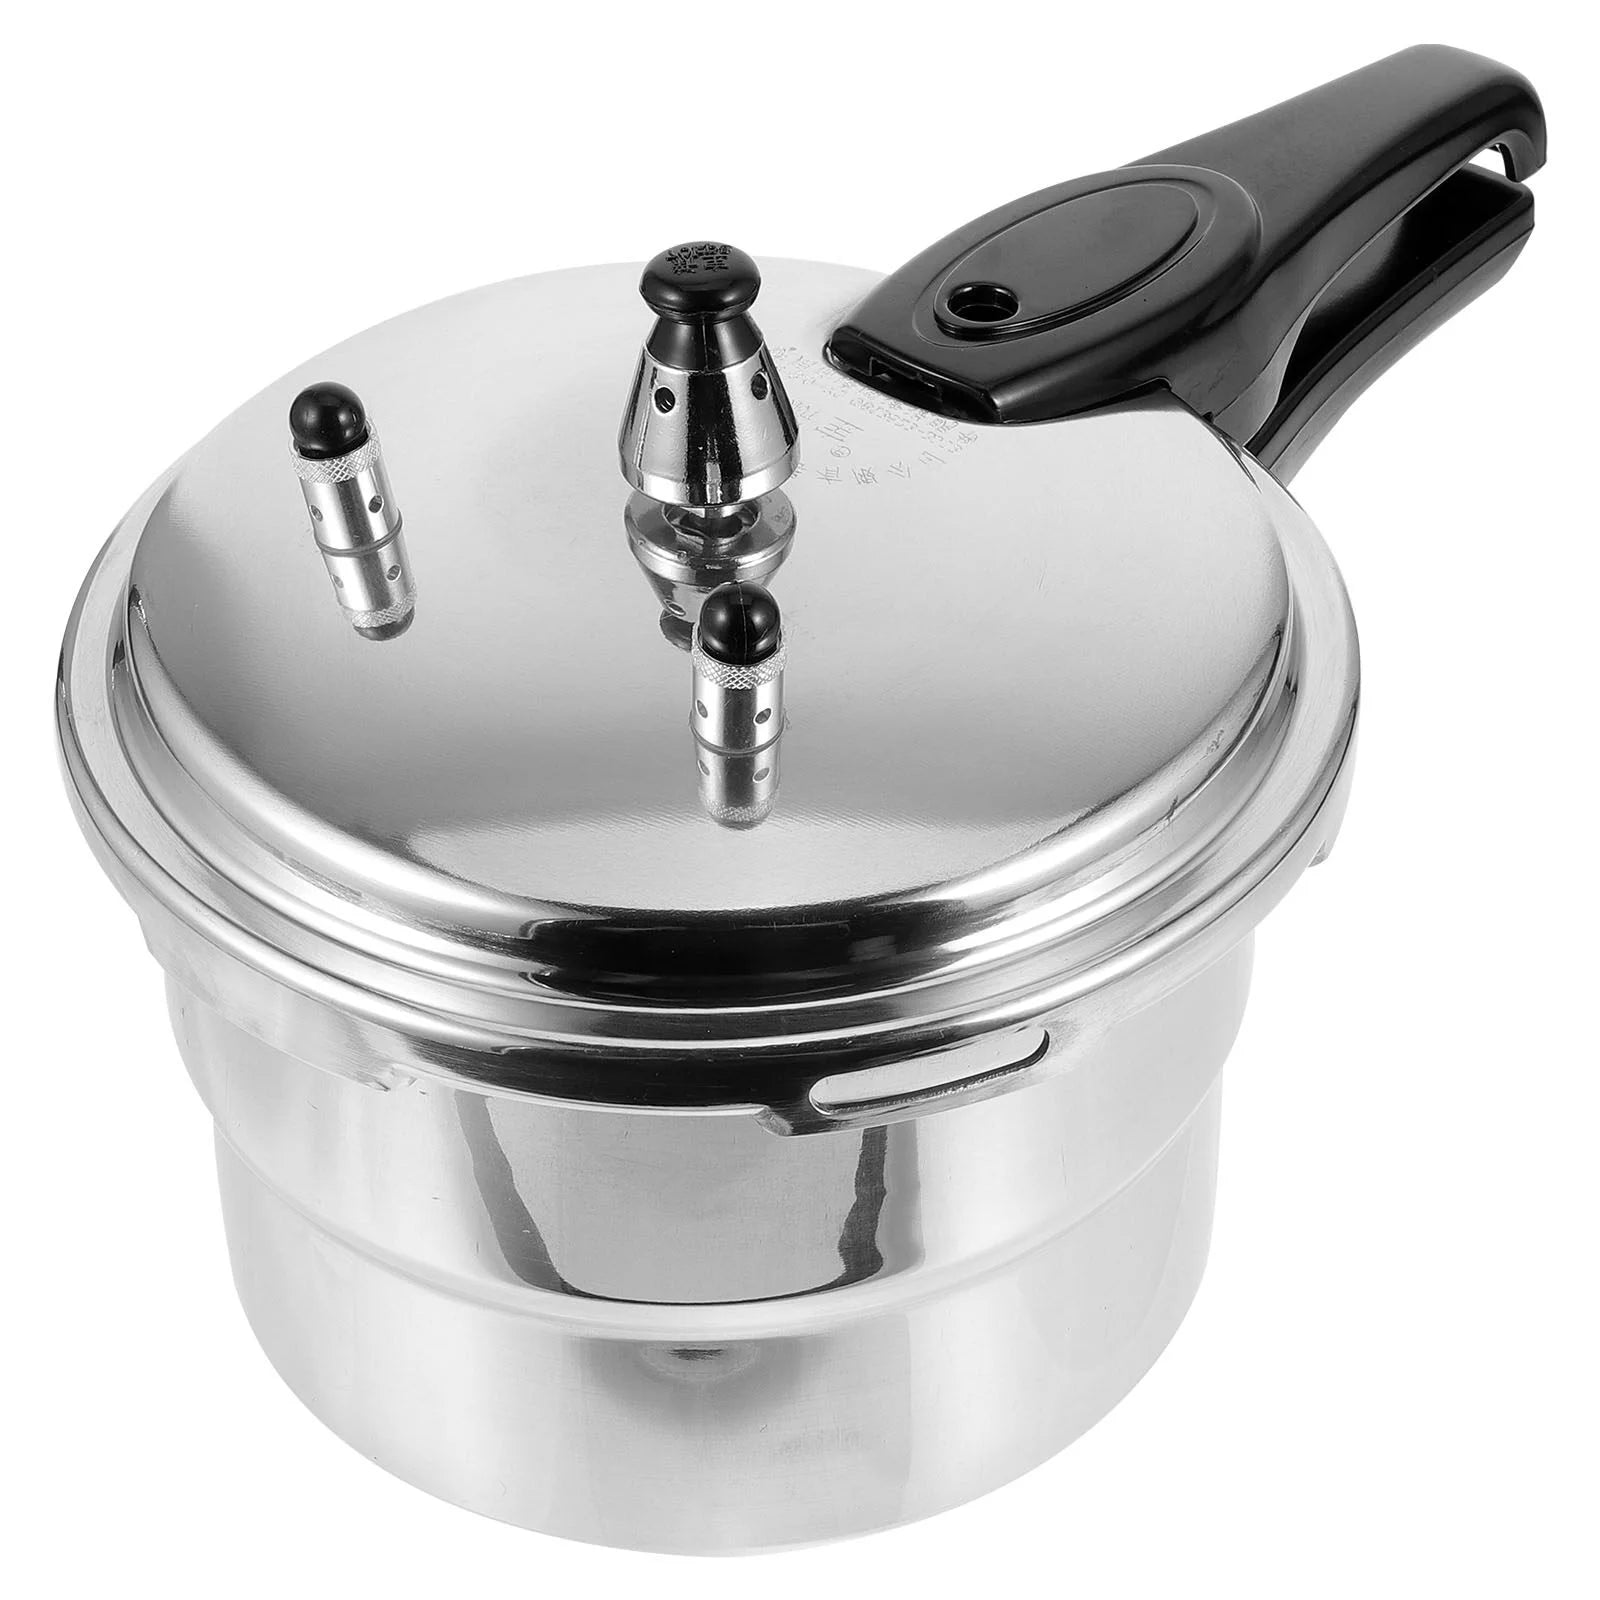 Electric Pressure Cooker Aluminum Alloy Safe Stainless Steel Pressure Cookers Canning Stove Top